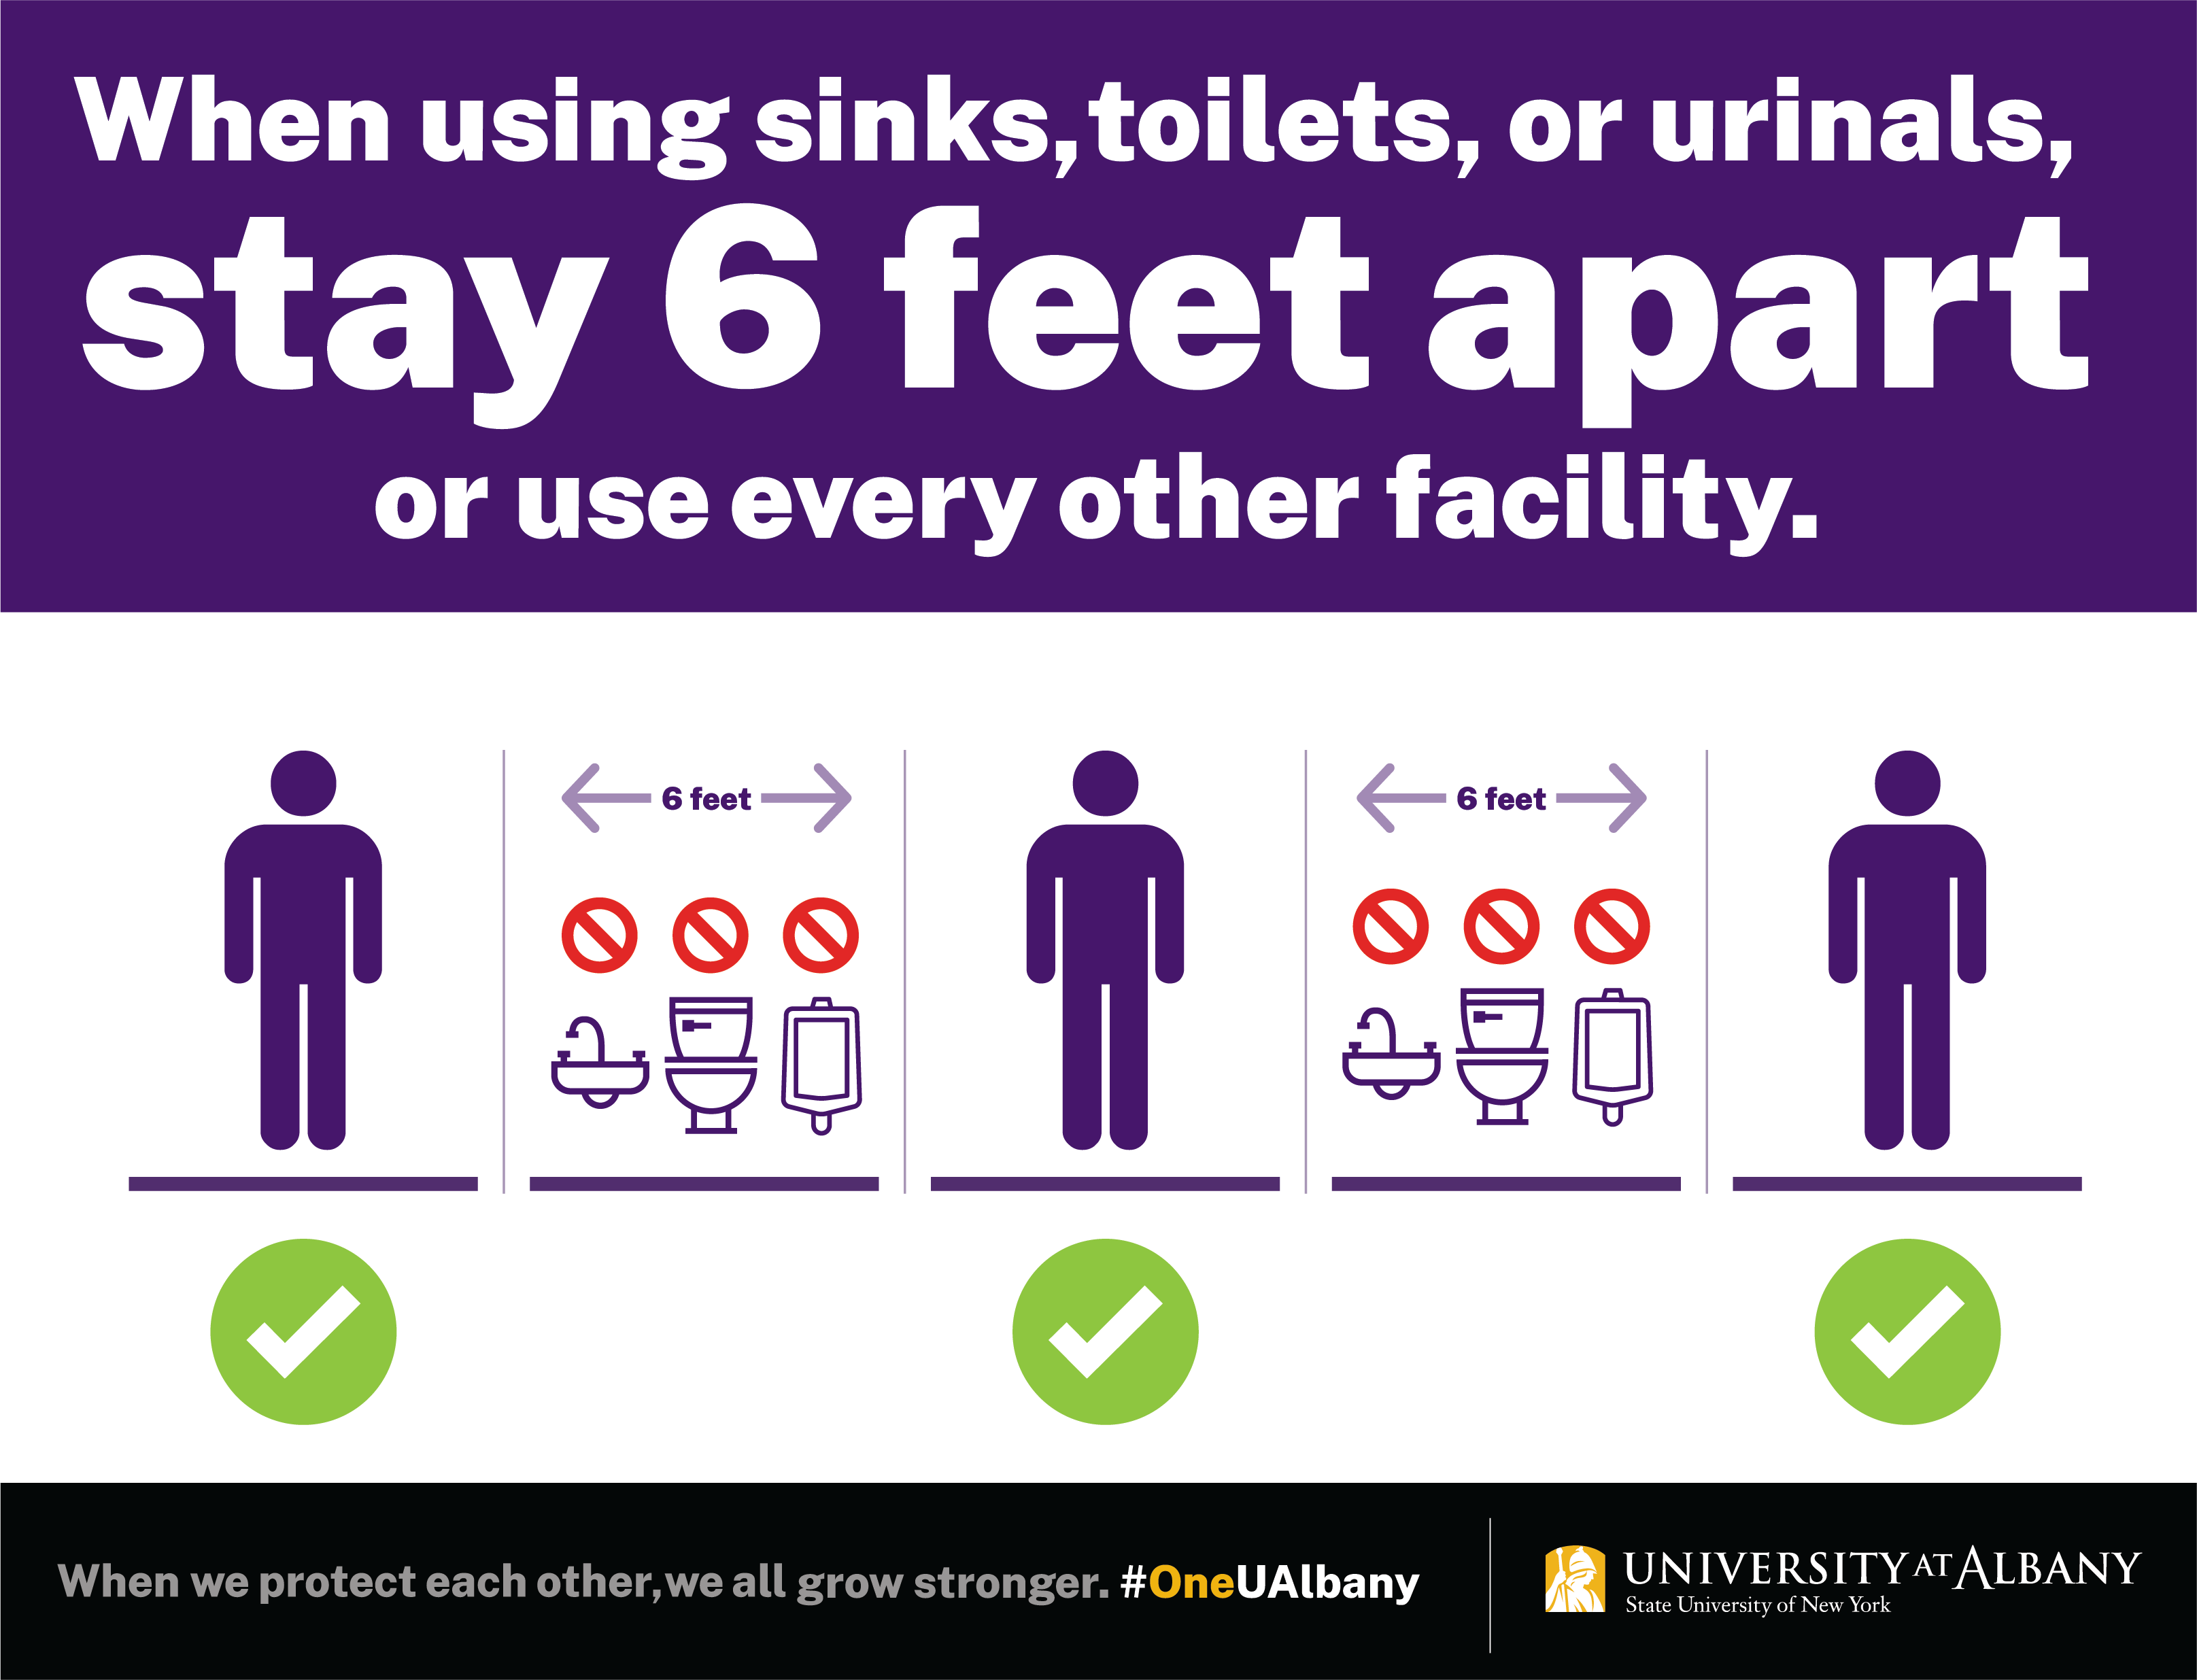 When using sinks, toilets, or urinals, stay 6 feet apart or use every other facility.